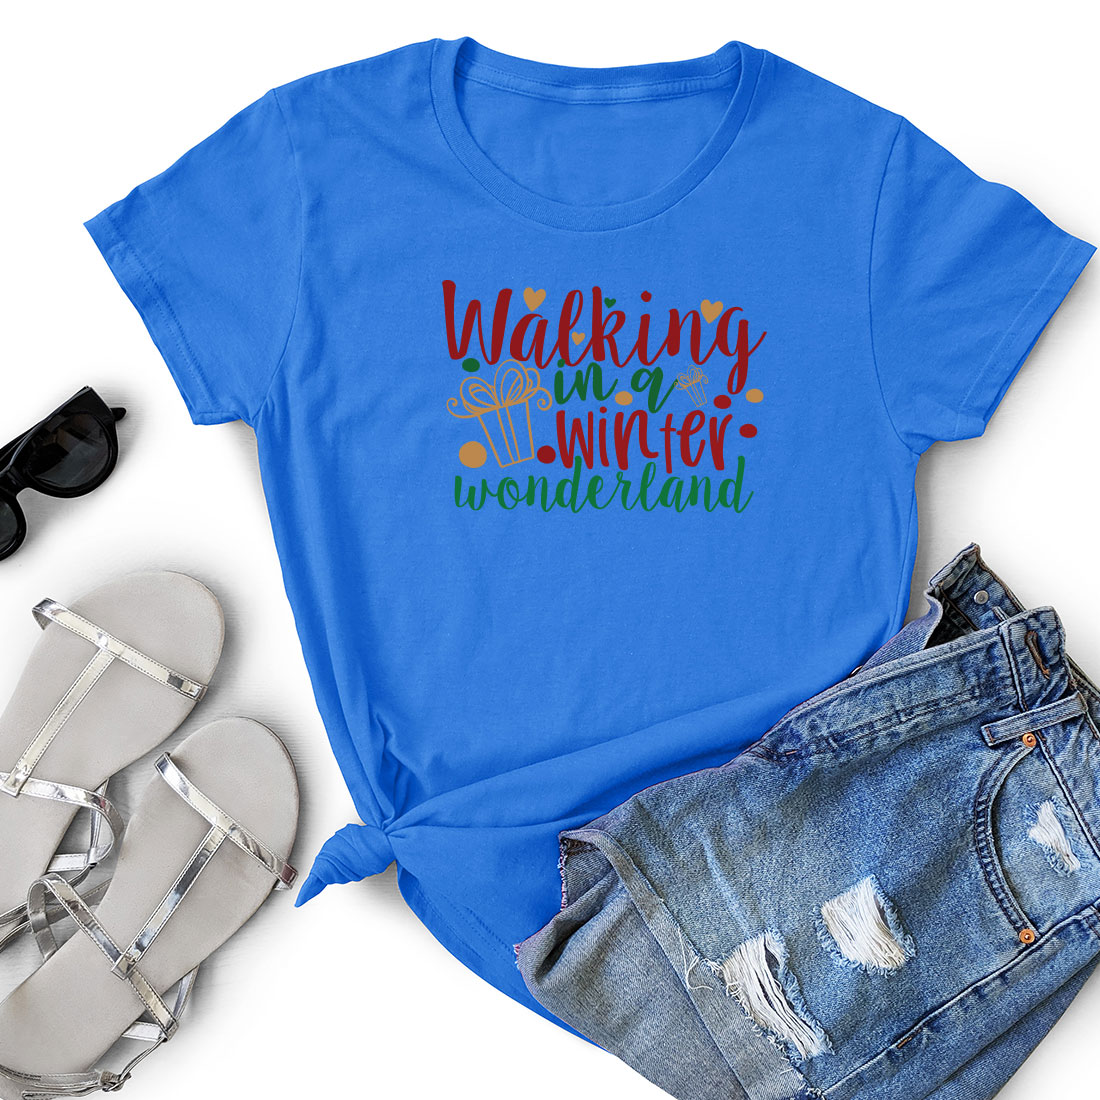 T - shirt that says waking is a winter wonderland.